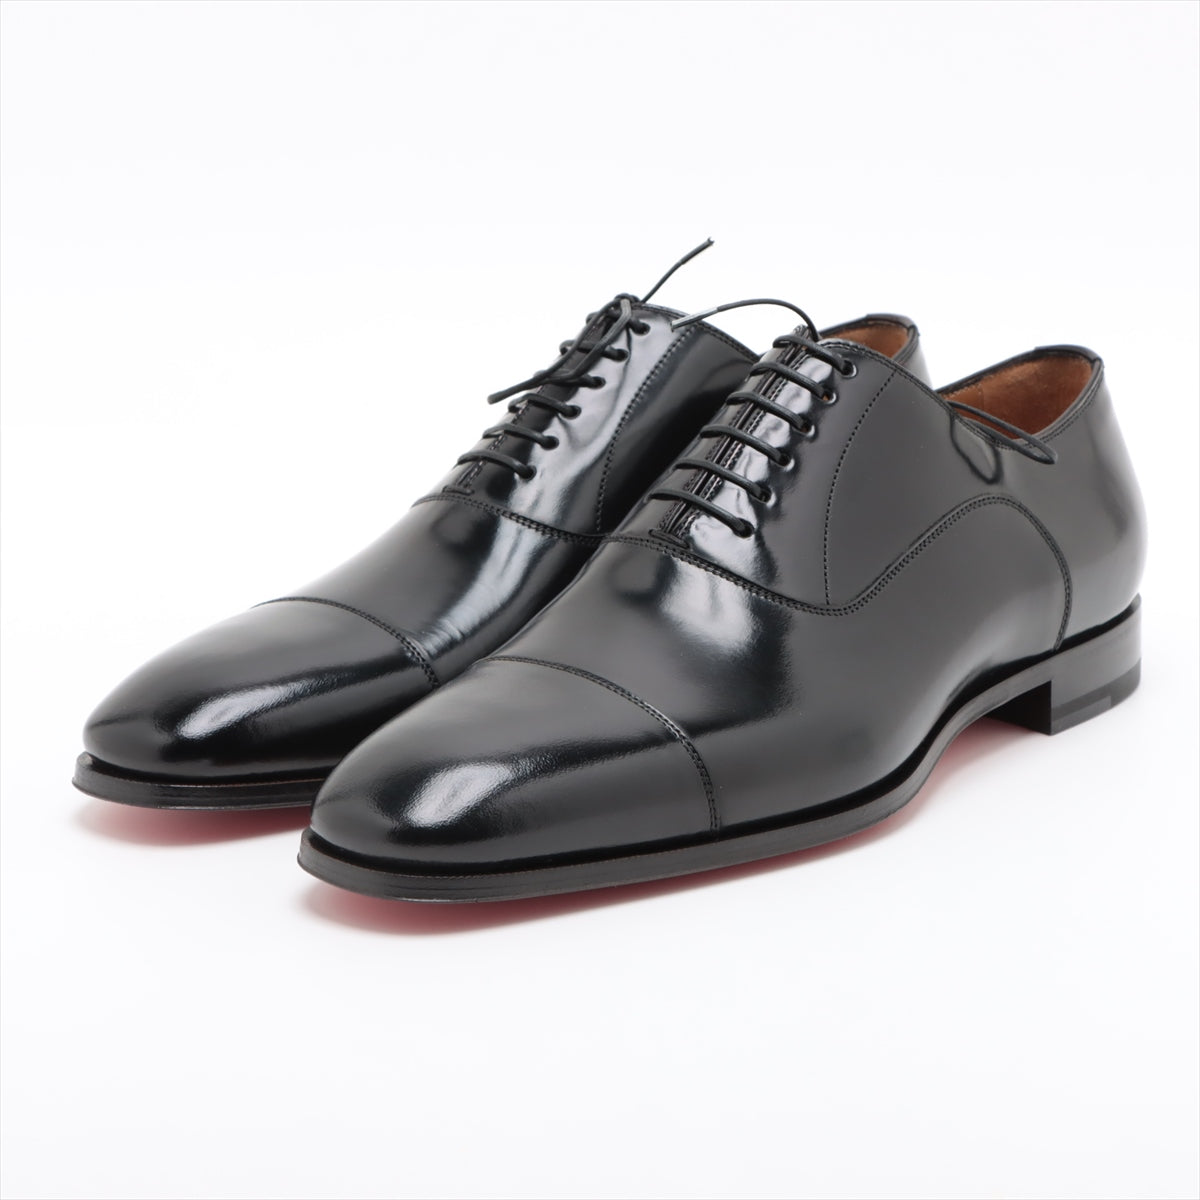 Christian Louboutin Leather Dress shoes 41 1/2 Men's Black ALPHA MALE FLAT Is there a replacement string